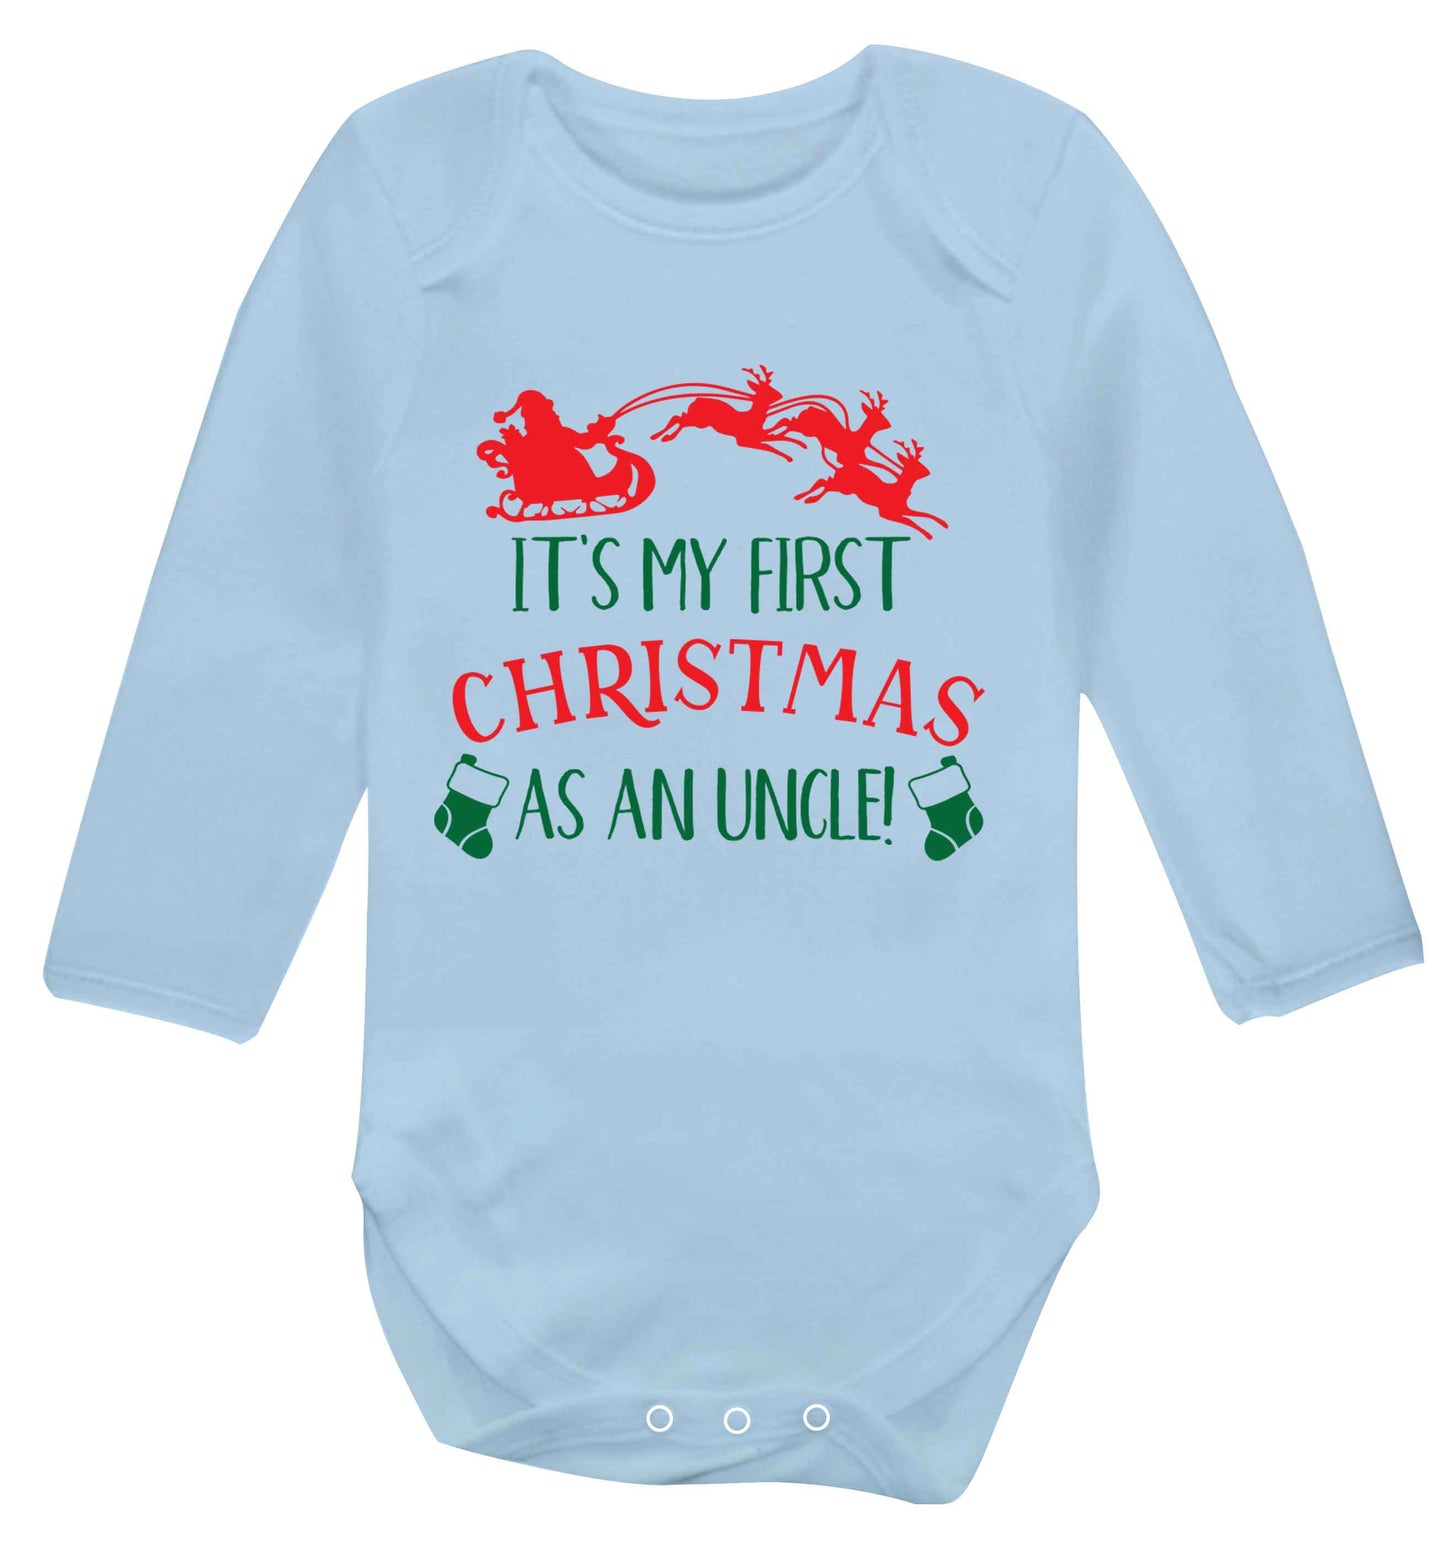 It's my first Christmas as an uncle! Baby Vest long sleeved pale blue 6-12 months